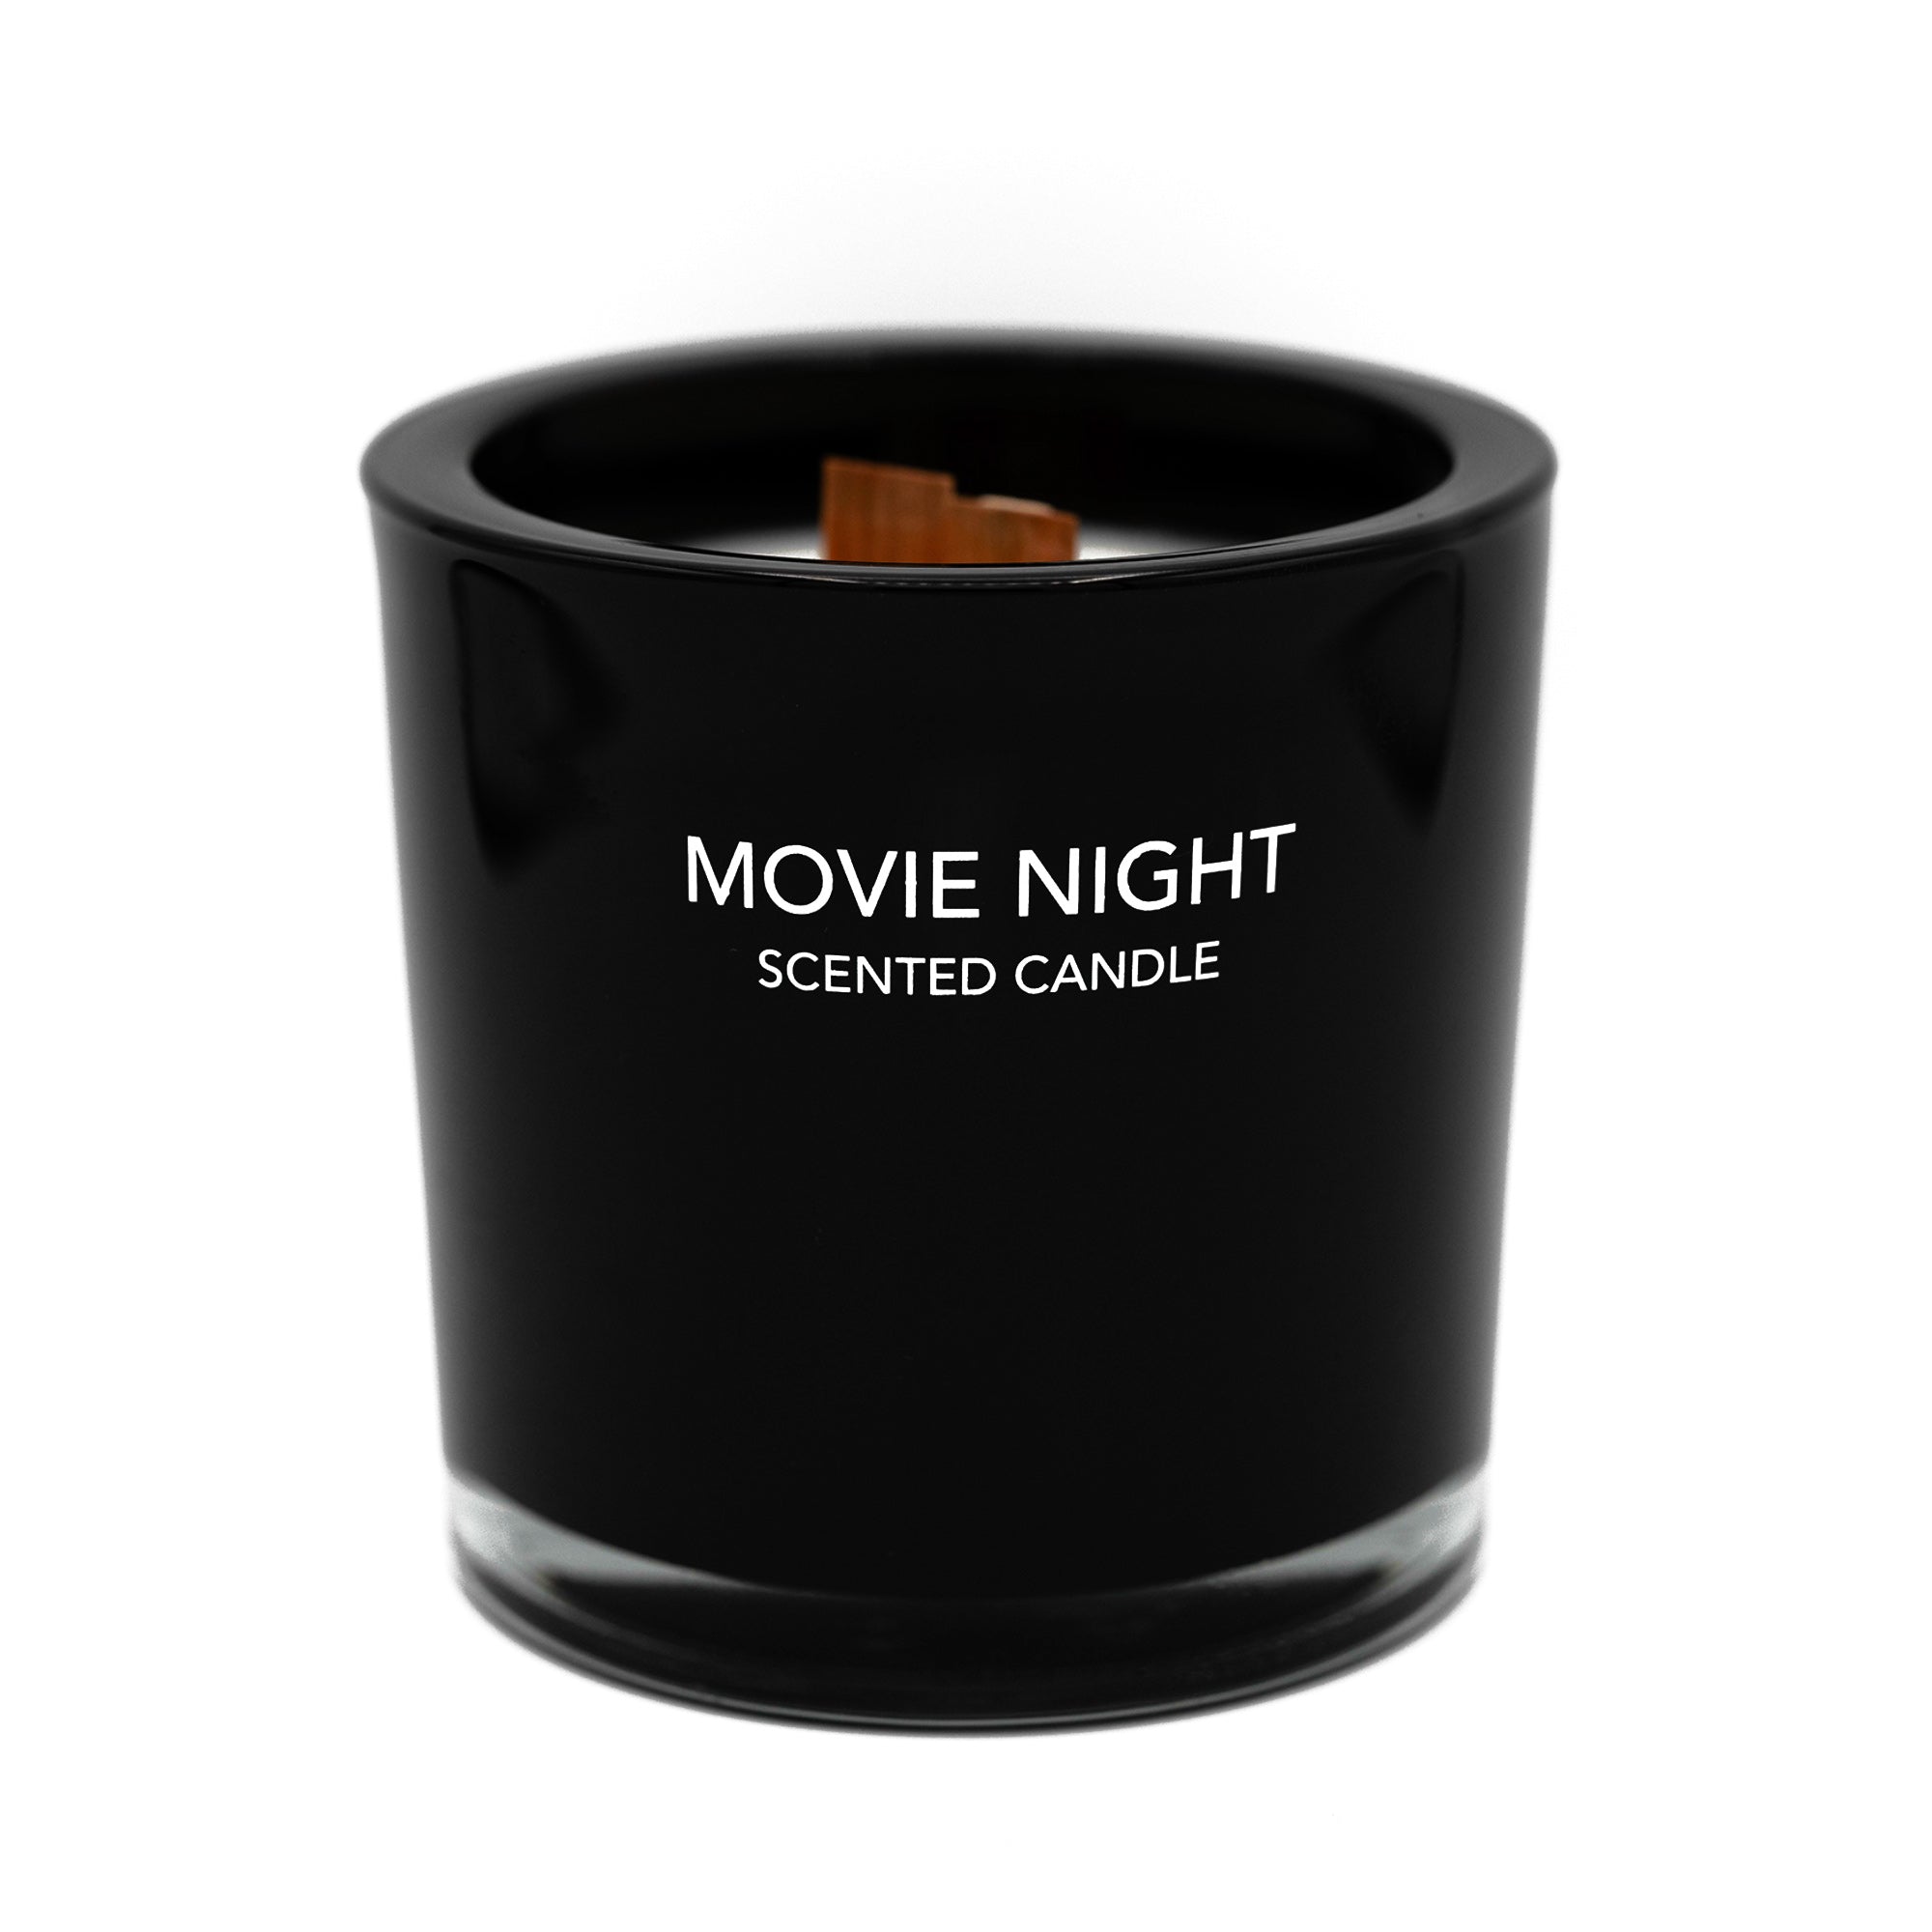 MOVIE NIGHT Scented Candle - Fragrance One